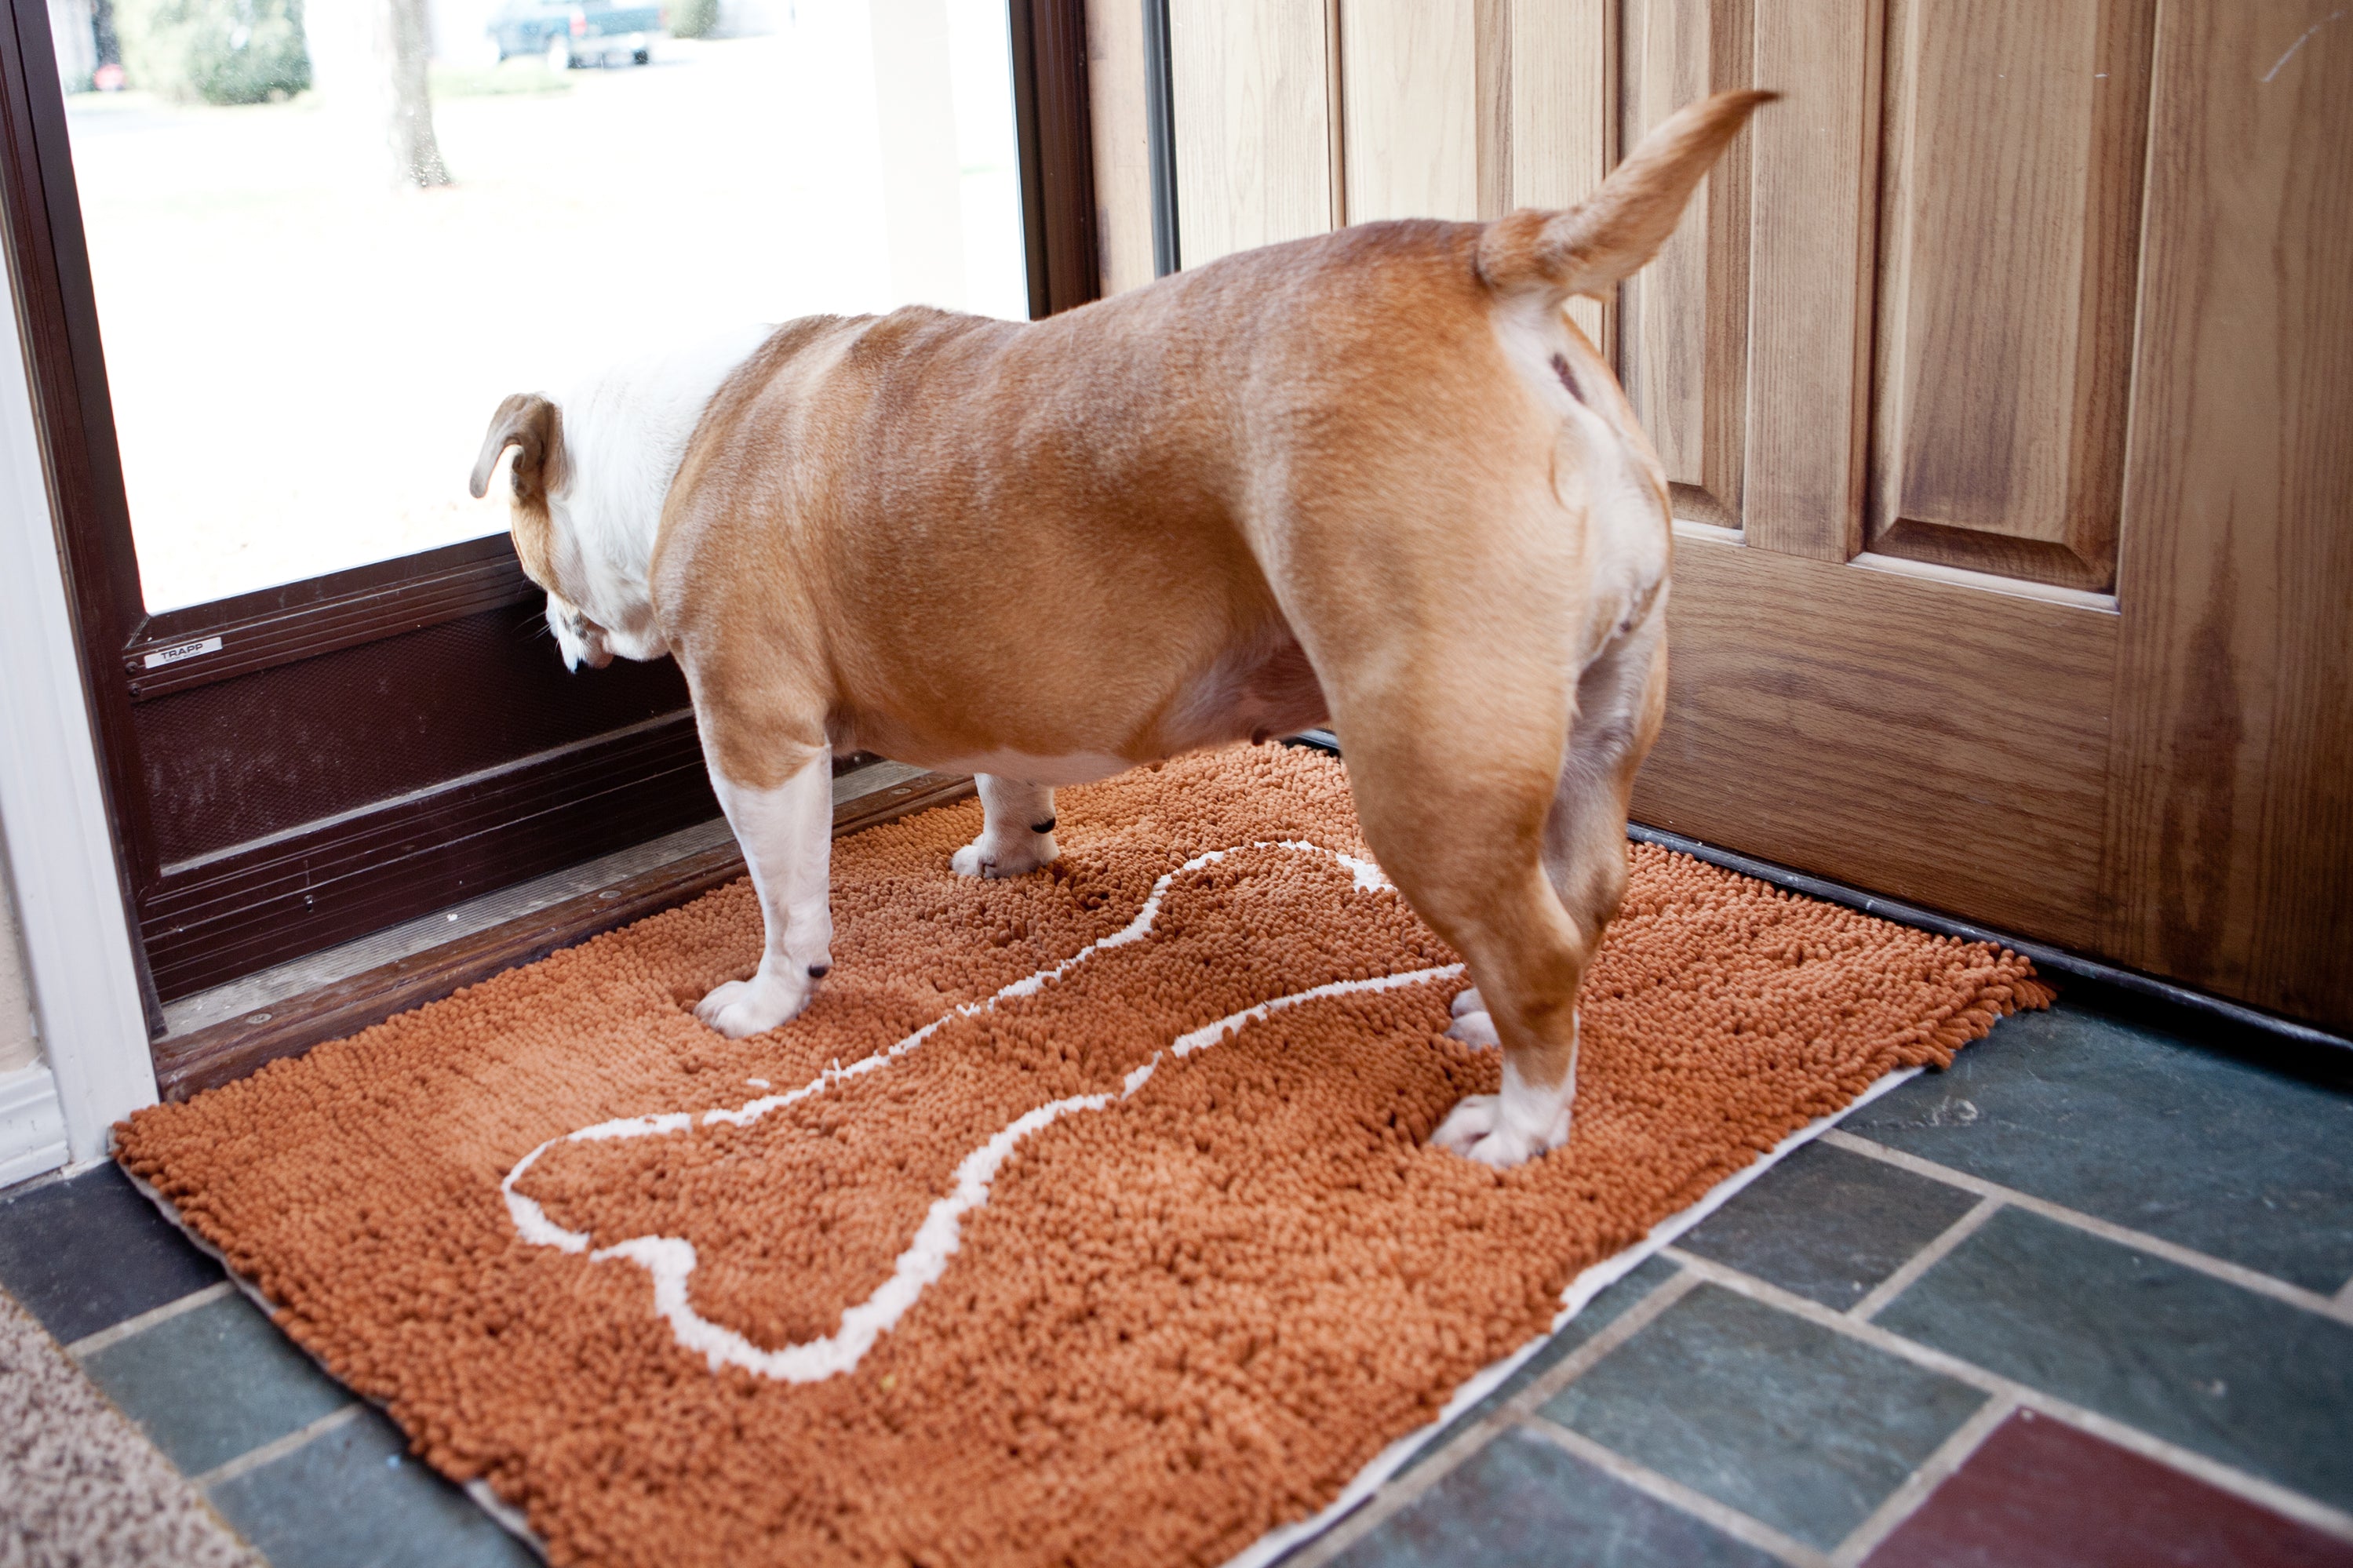  Soggy Doggy Doormat with Bone Design, Microfiber Chenille  Indoor Wet Dog Mat for Muddy Paws and Drying, Ultra-Absorbent Dog Mats for  Sleeping and Lounging, Caramel Brown/Oatmeal Bone : Pet Bed